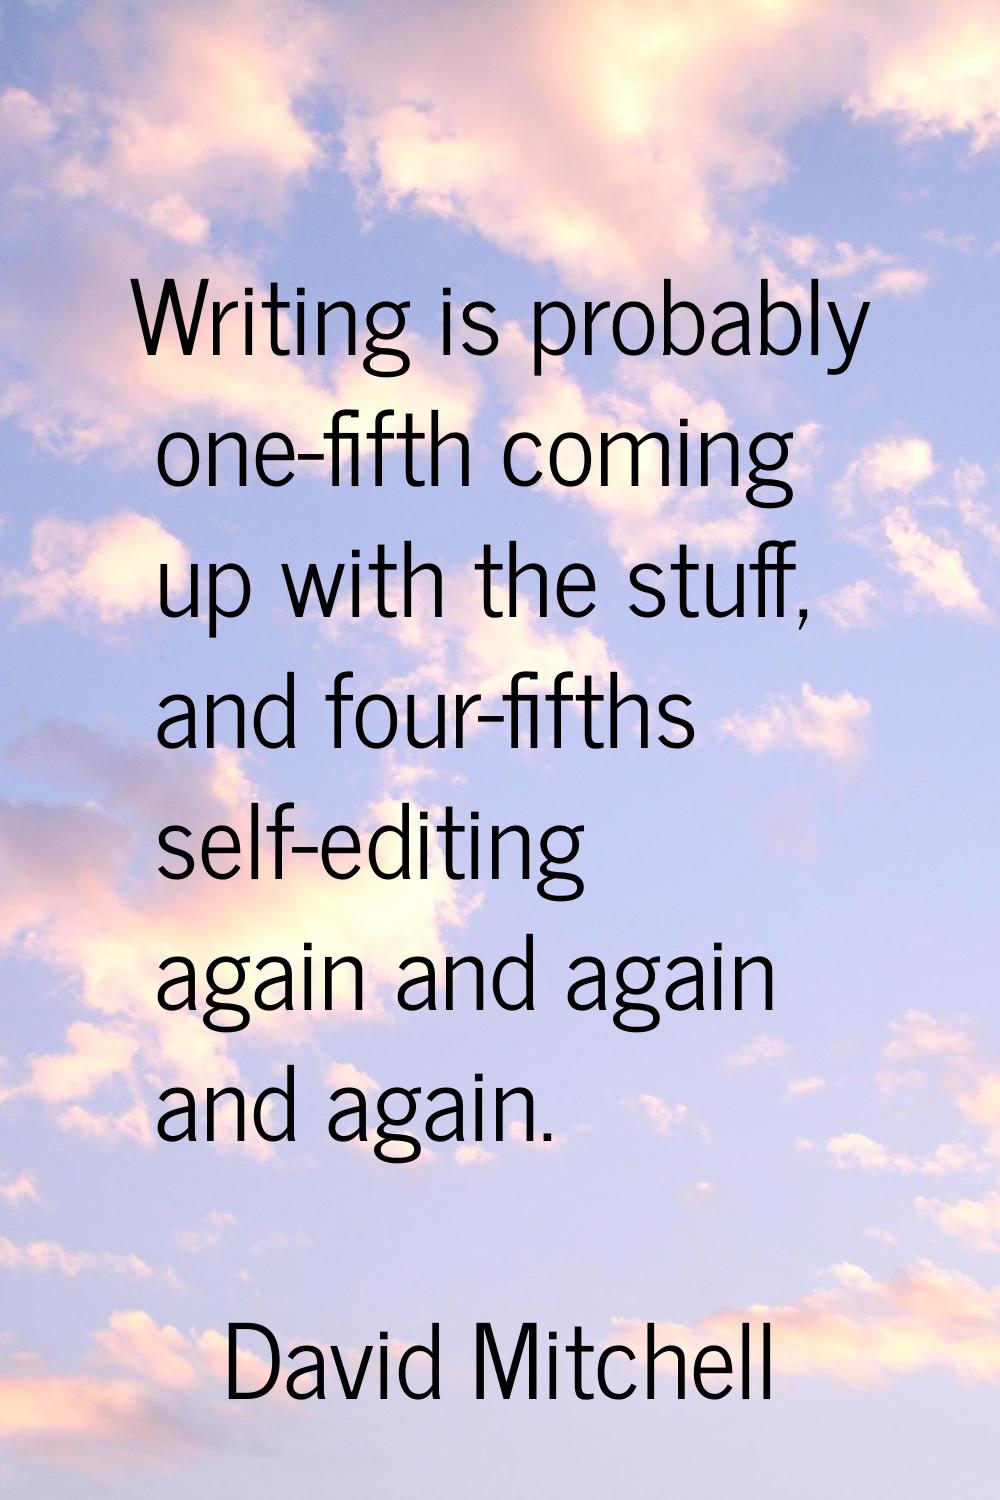 Writing is probably one-fifth coming up with the stuff, and four-fifths self-editing again and agai